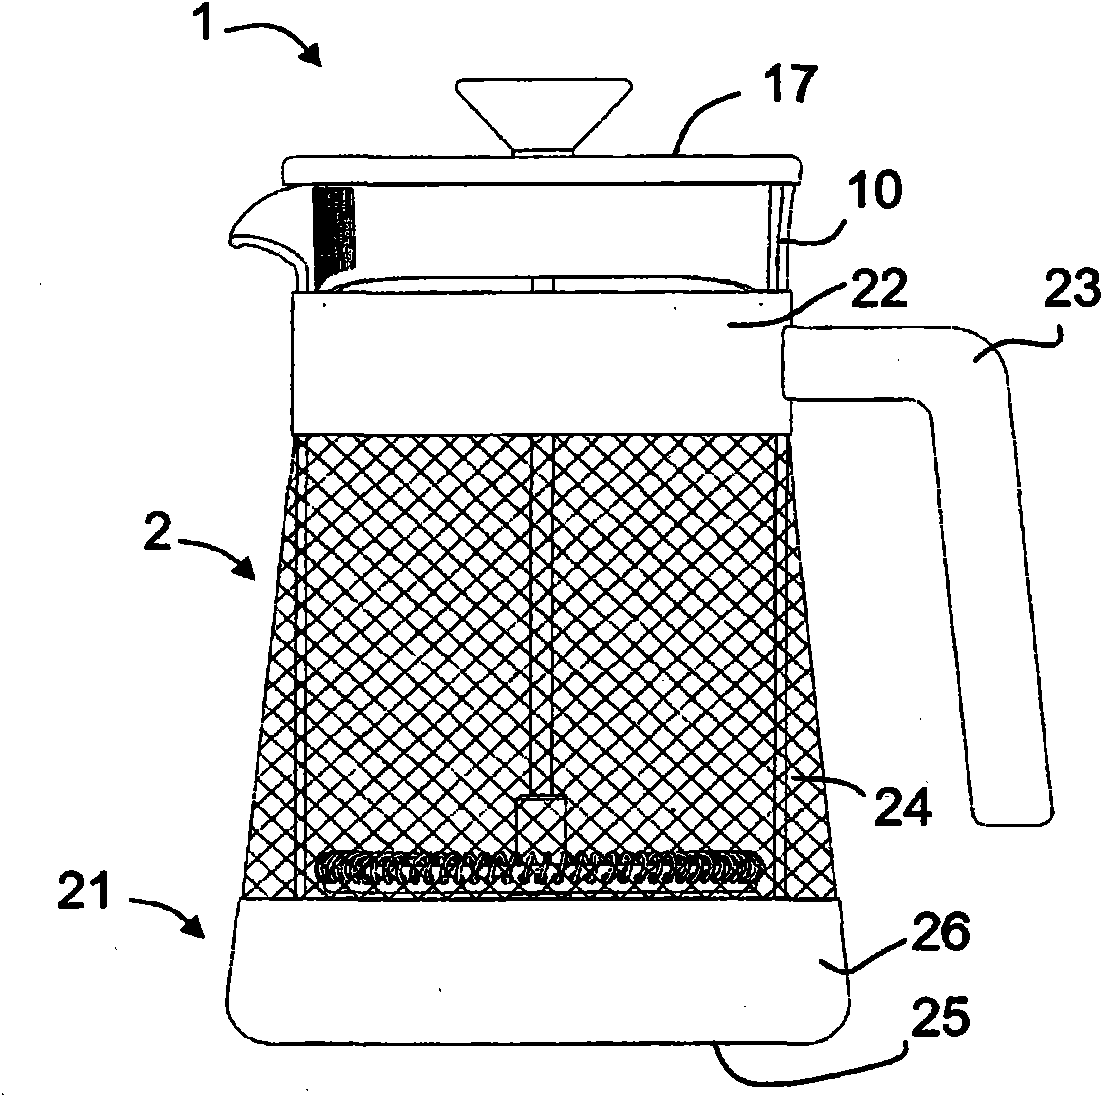 Plunger-filter beverage preparation device with safety sheathing